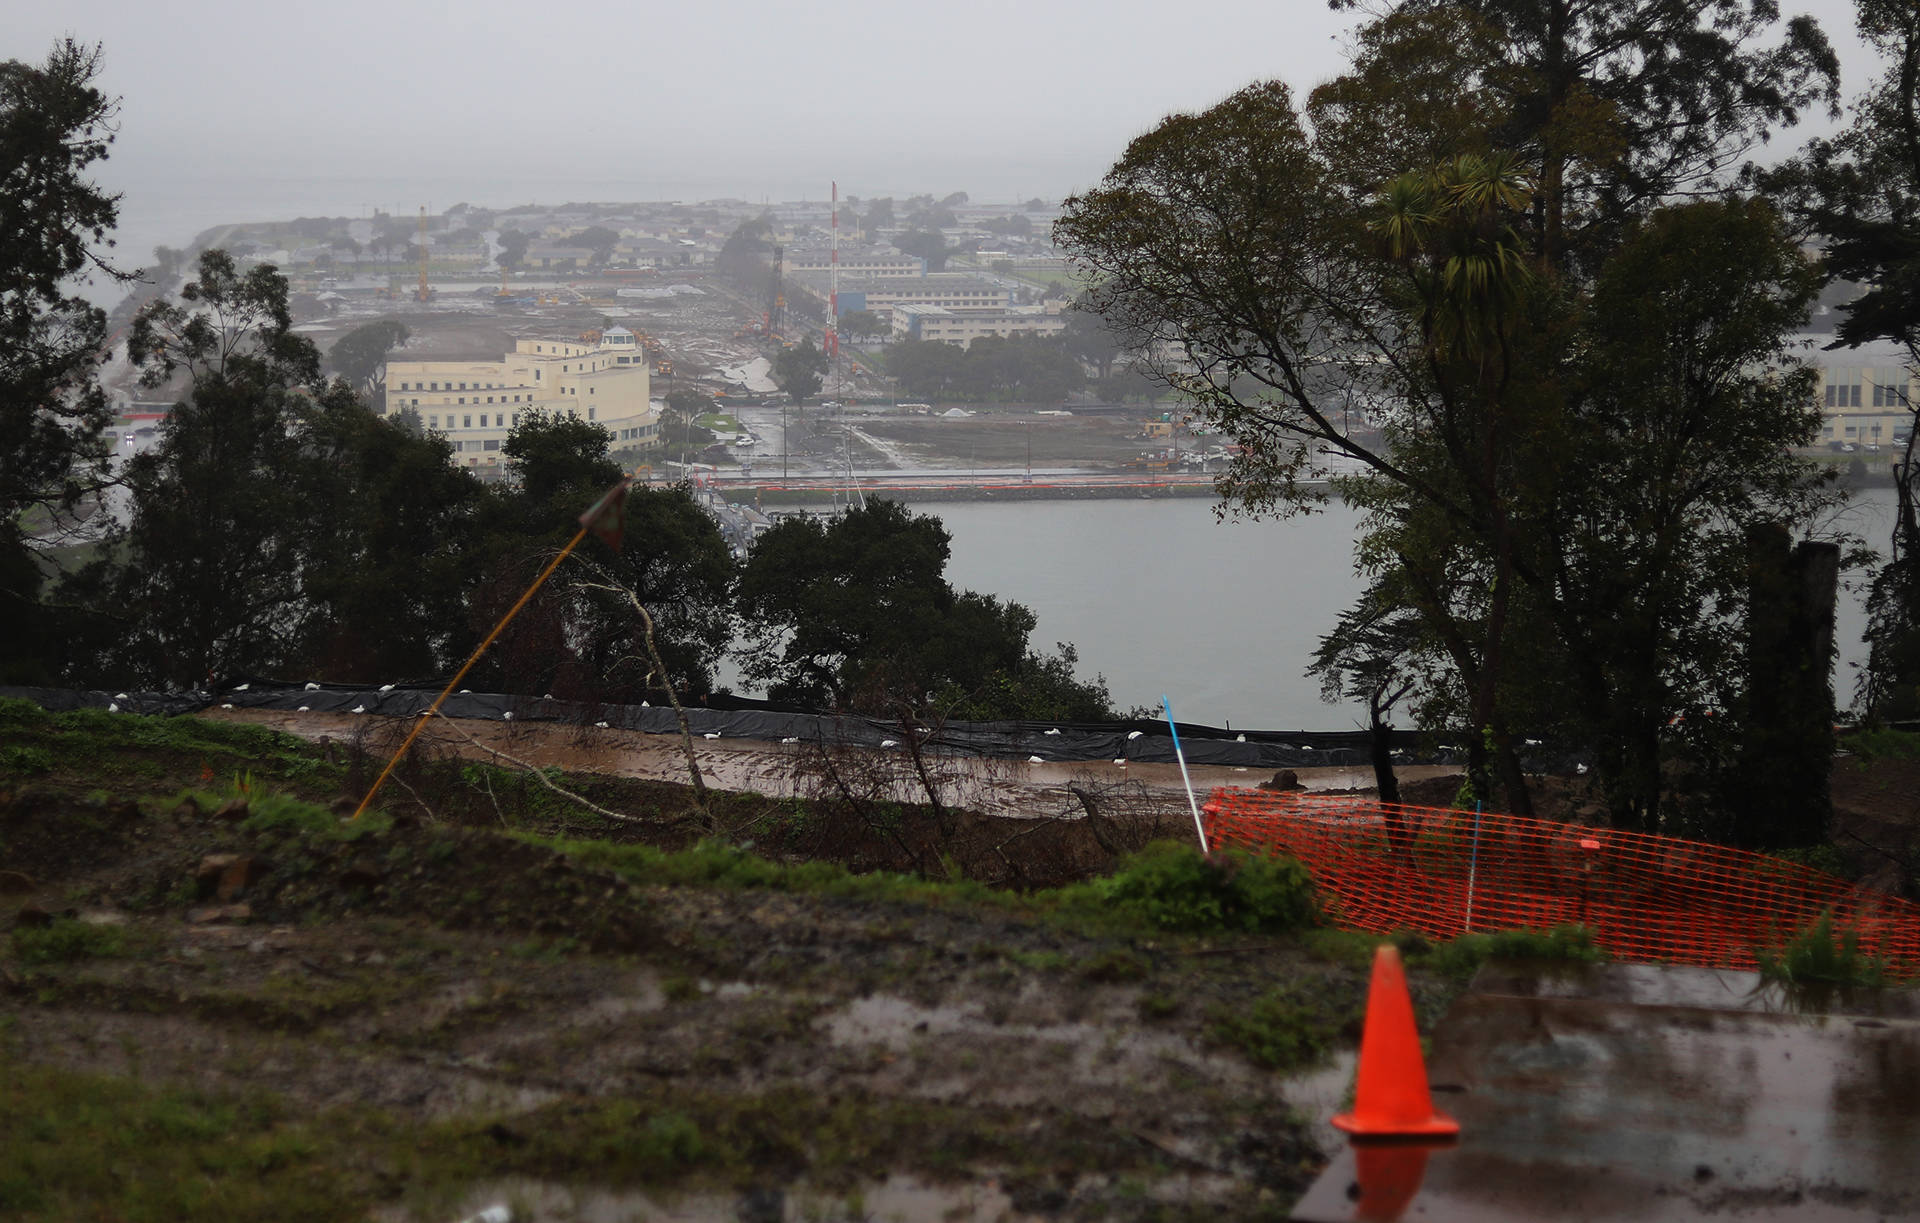 View of Treasure Island. The toxic compounds PFOS and PFOA, a type of PFAS, are present on the island at levels far beyond EPA guidelines. Lindsey Moore/KQED